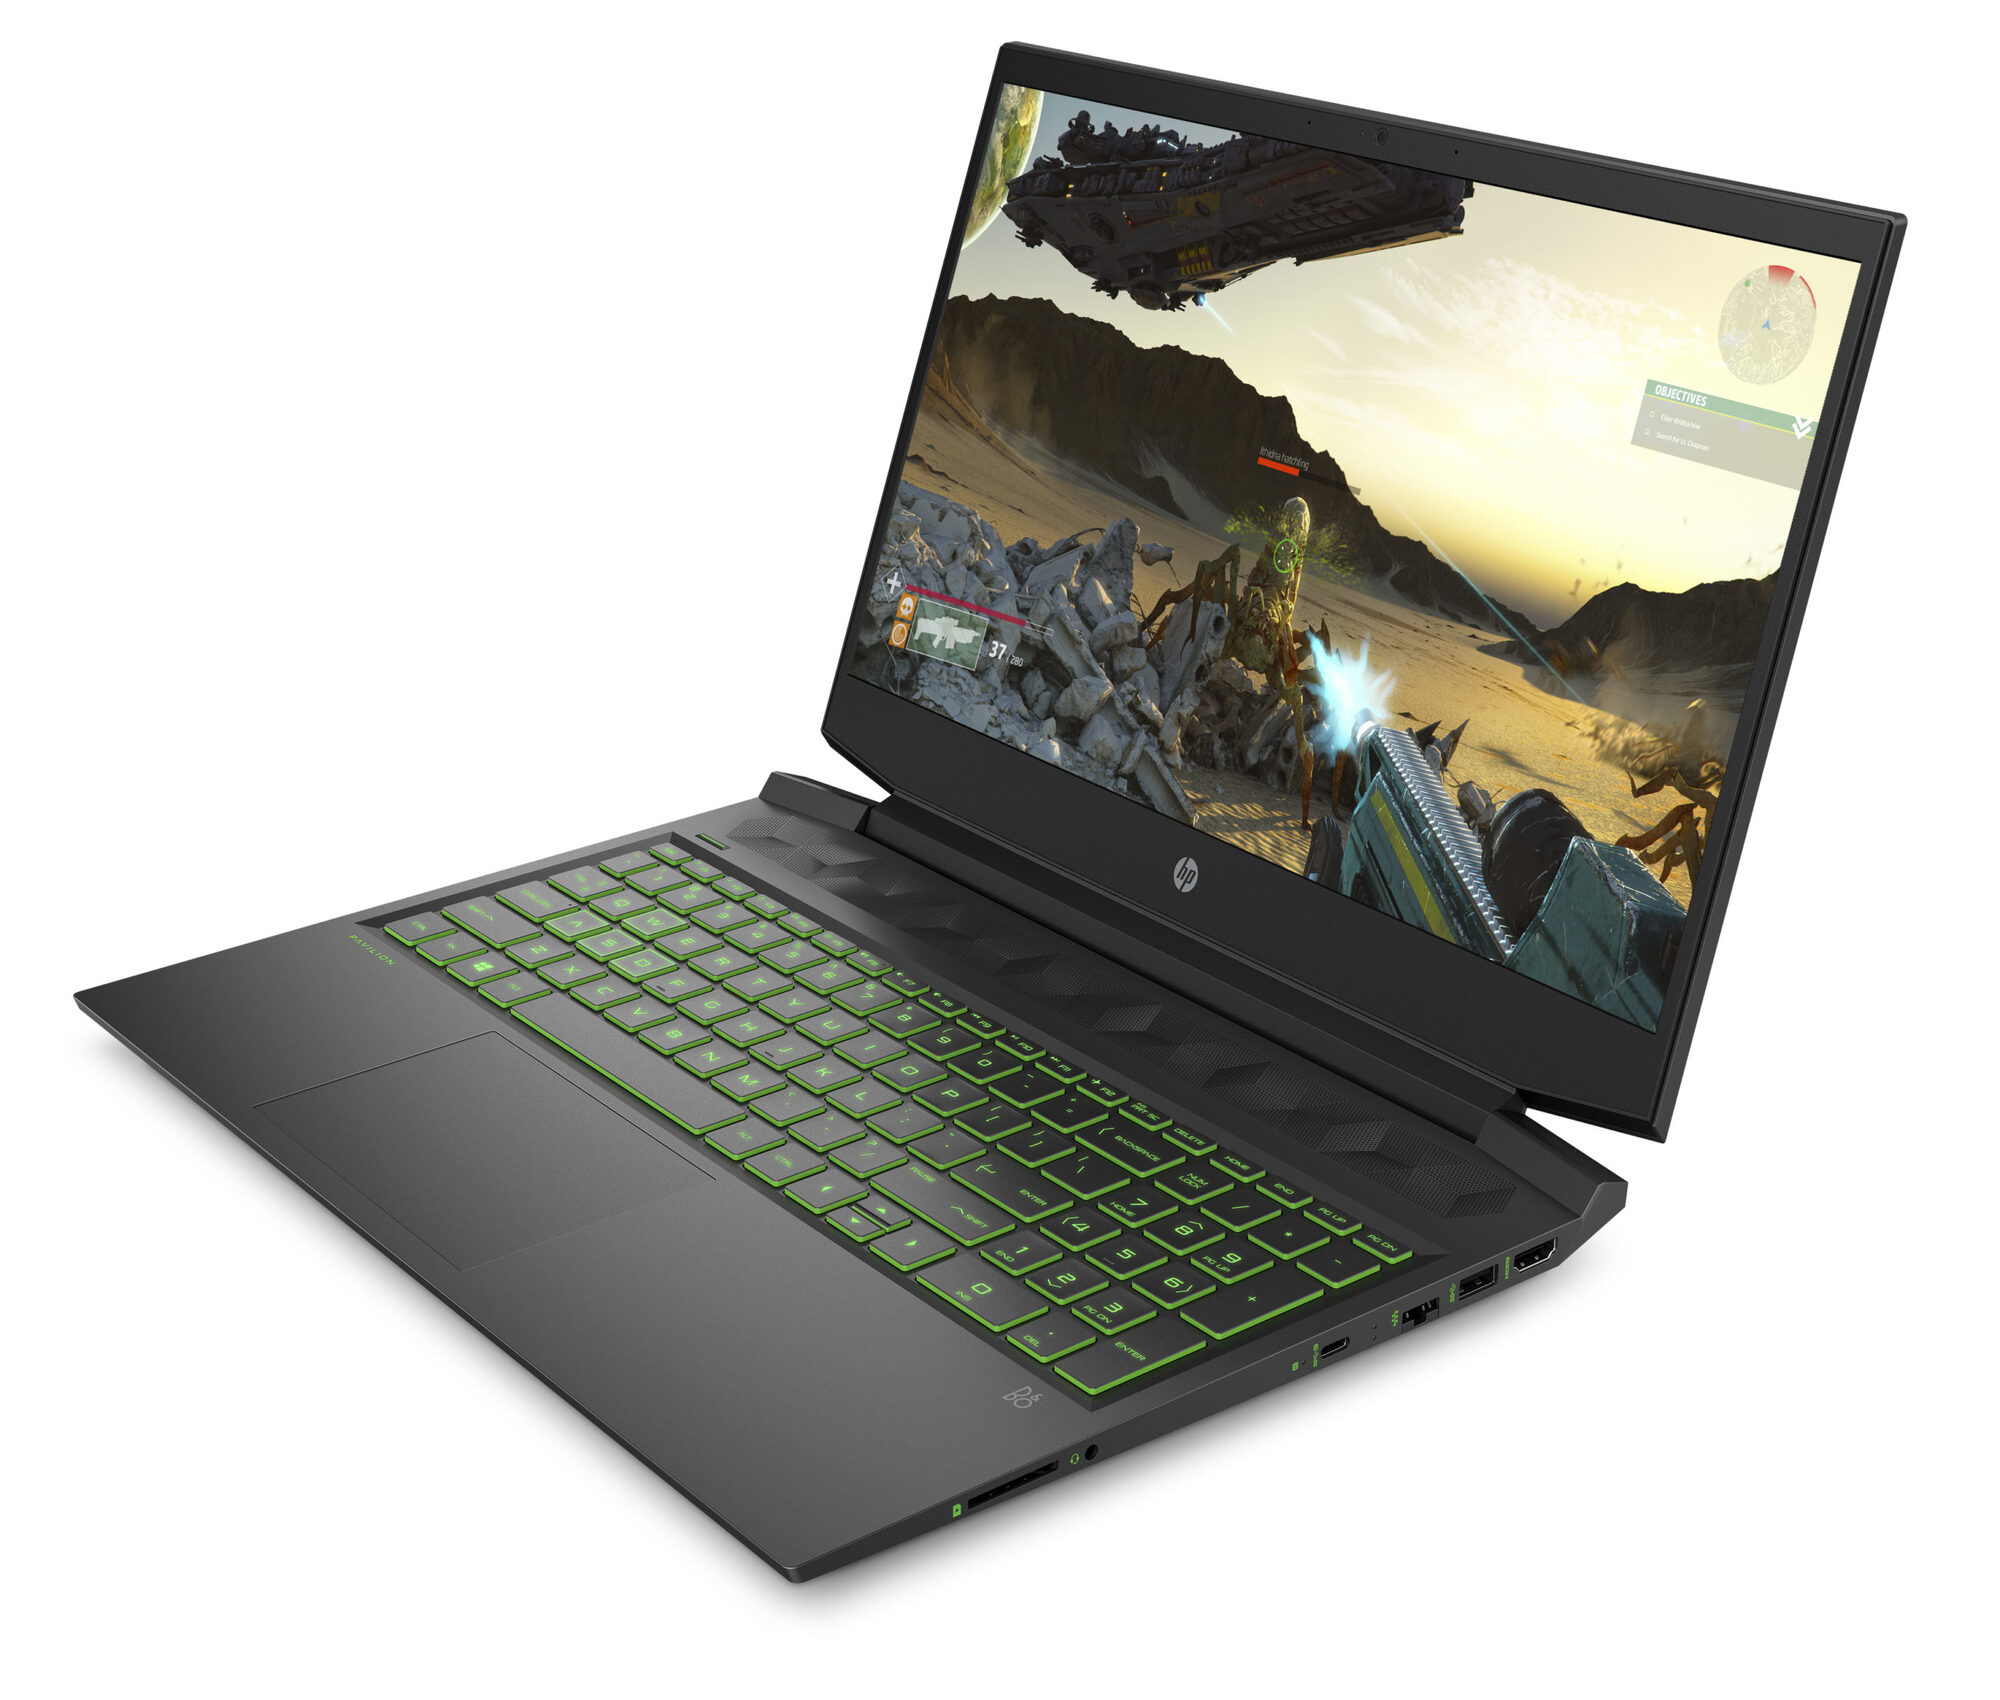 HP reimagines OMEN 15 laptop and introduces Pavilion Gaming 16 f0c9574b1131afa2d8b9c7e932ab300d-scaled.jpg